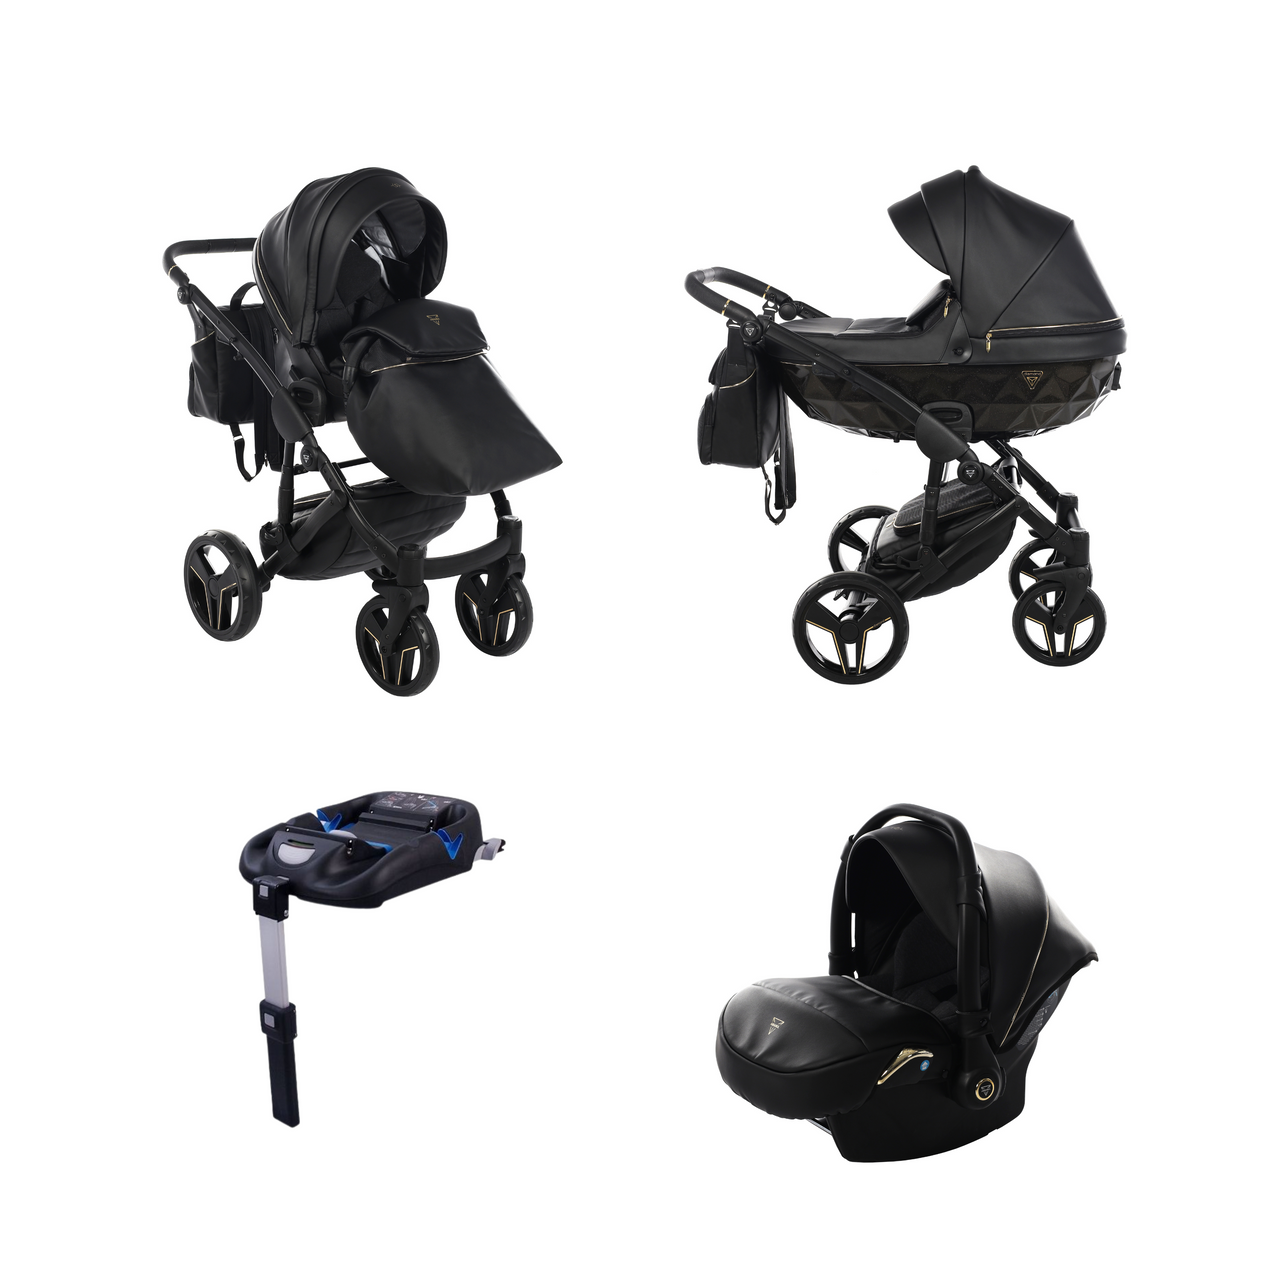 Junama S-Class 3 In 1 Travel System - Black - Yes | For Your Little One